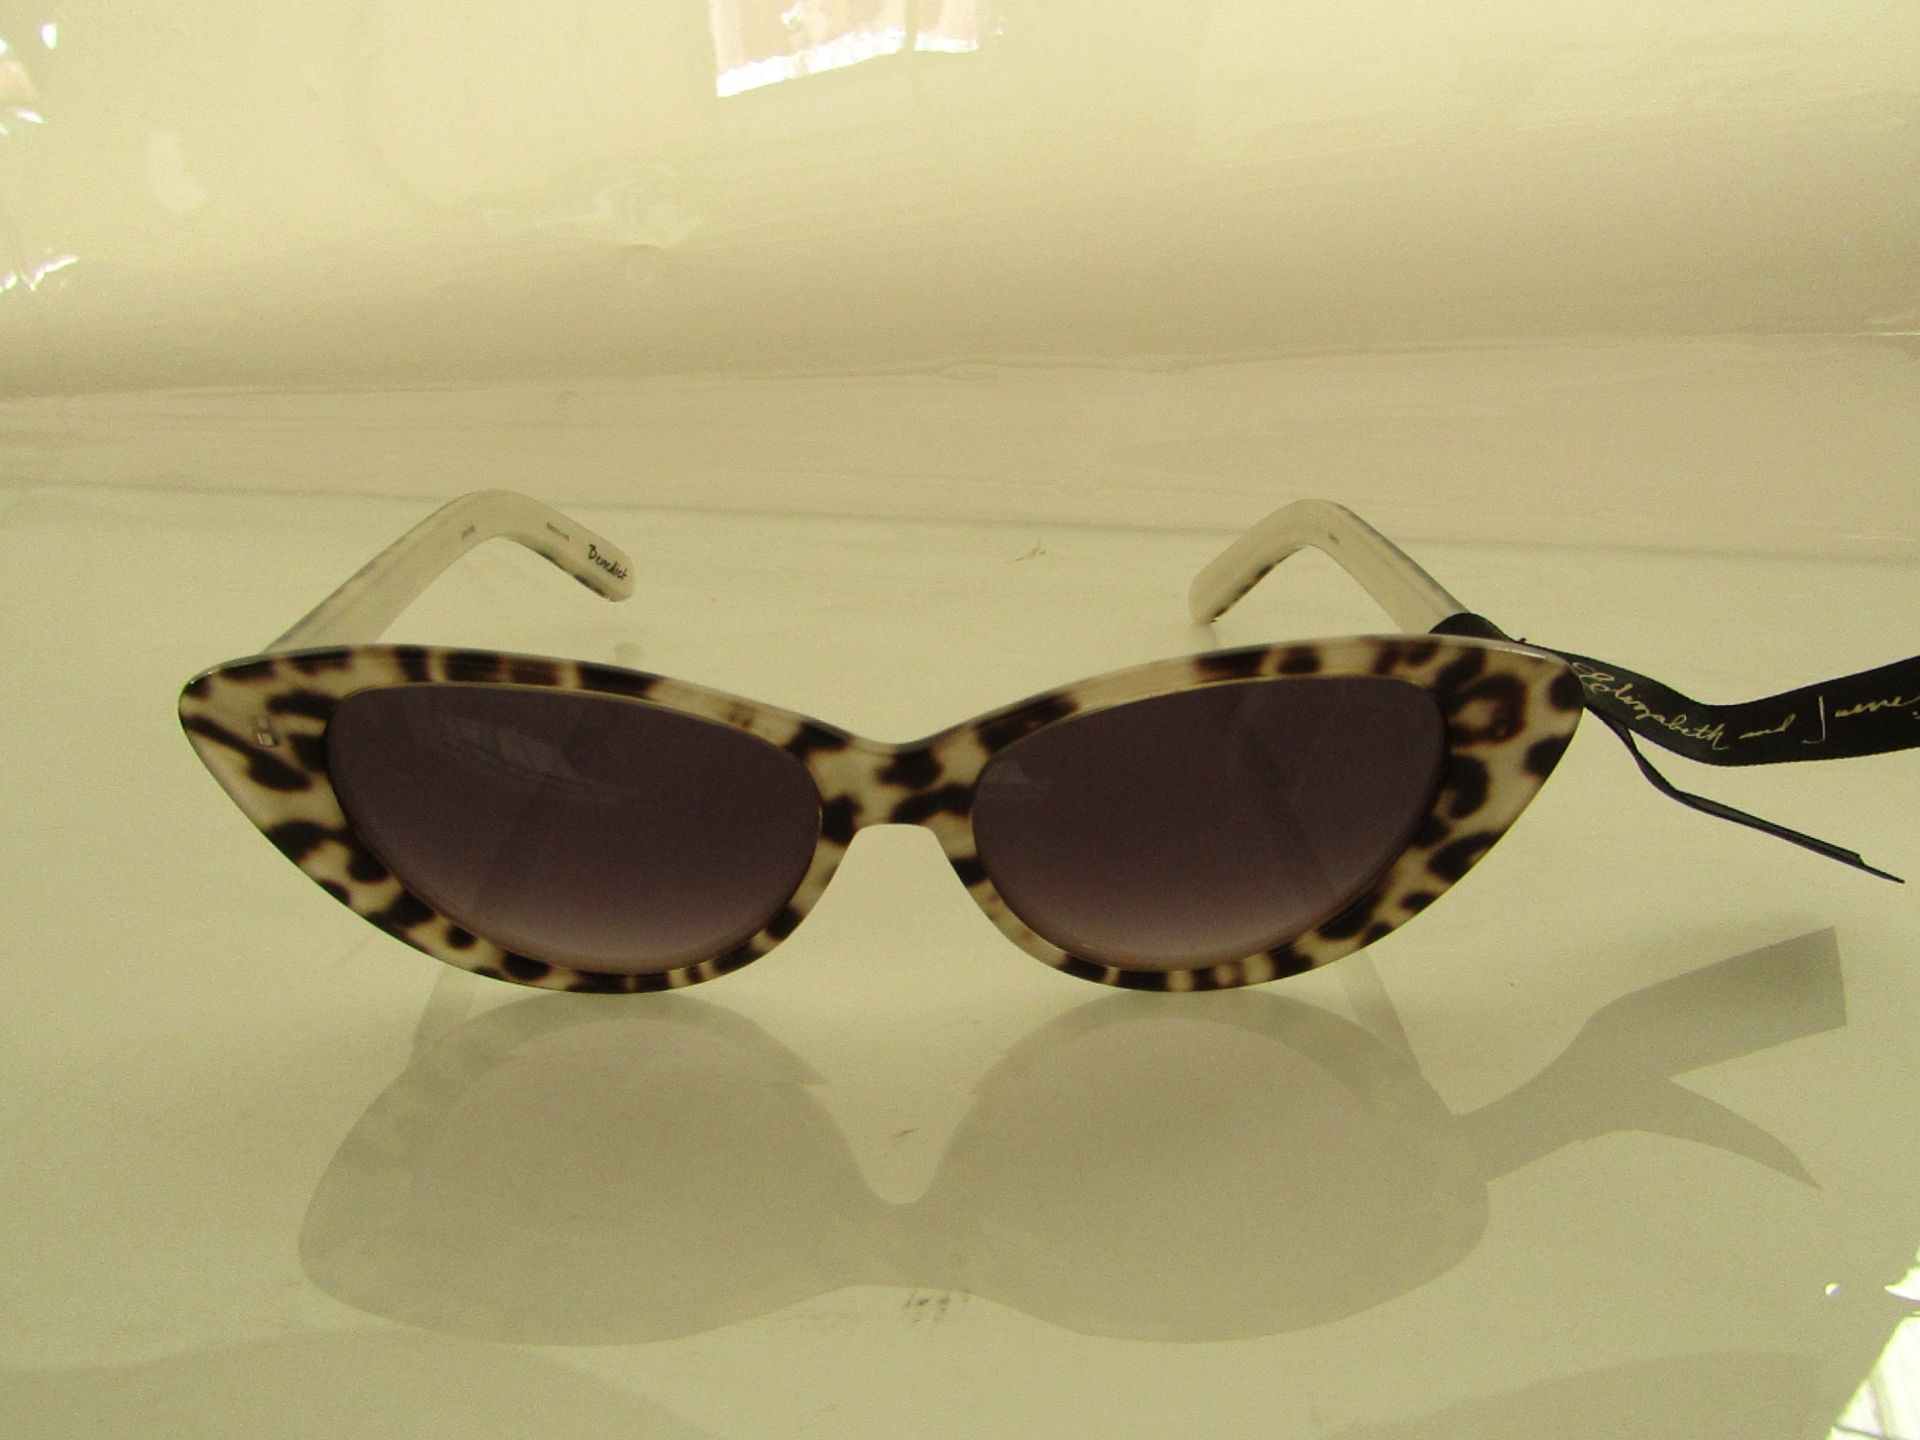 Elizabeth and James Benedict Sunglasses, New, Sunglasses from this designer Typically retail